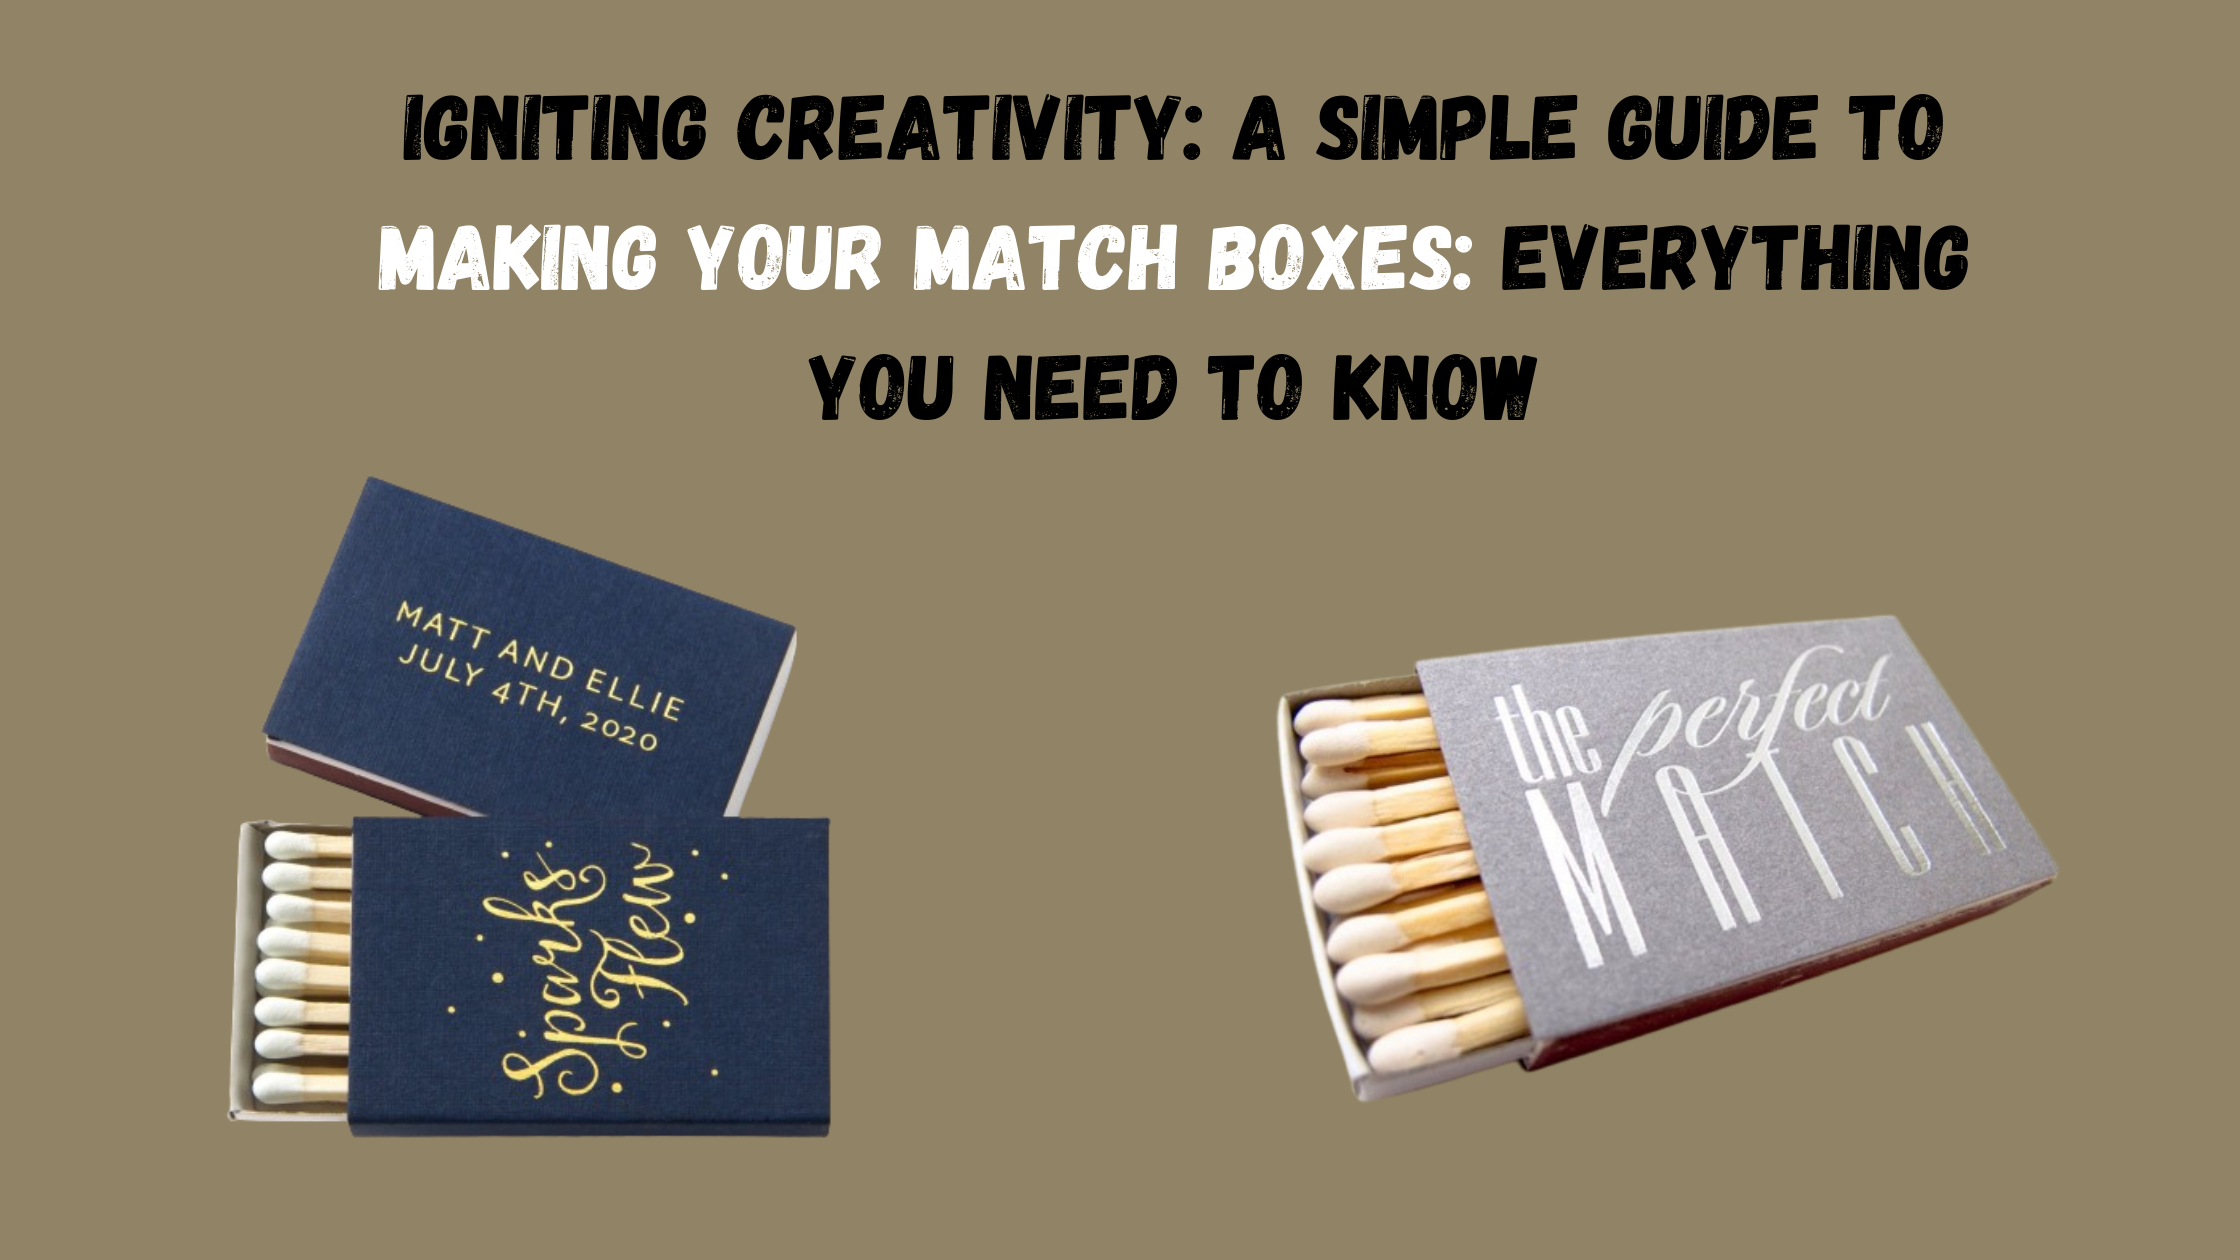 Igniting Creativity A Simple Guide to Making Your Match Boxes Everything You Need To Know.